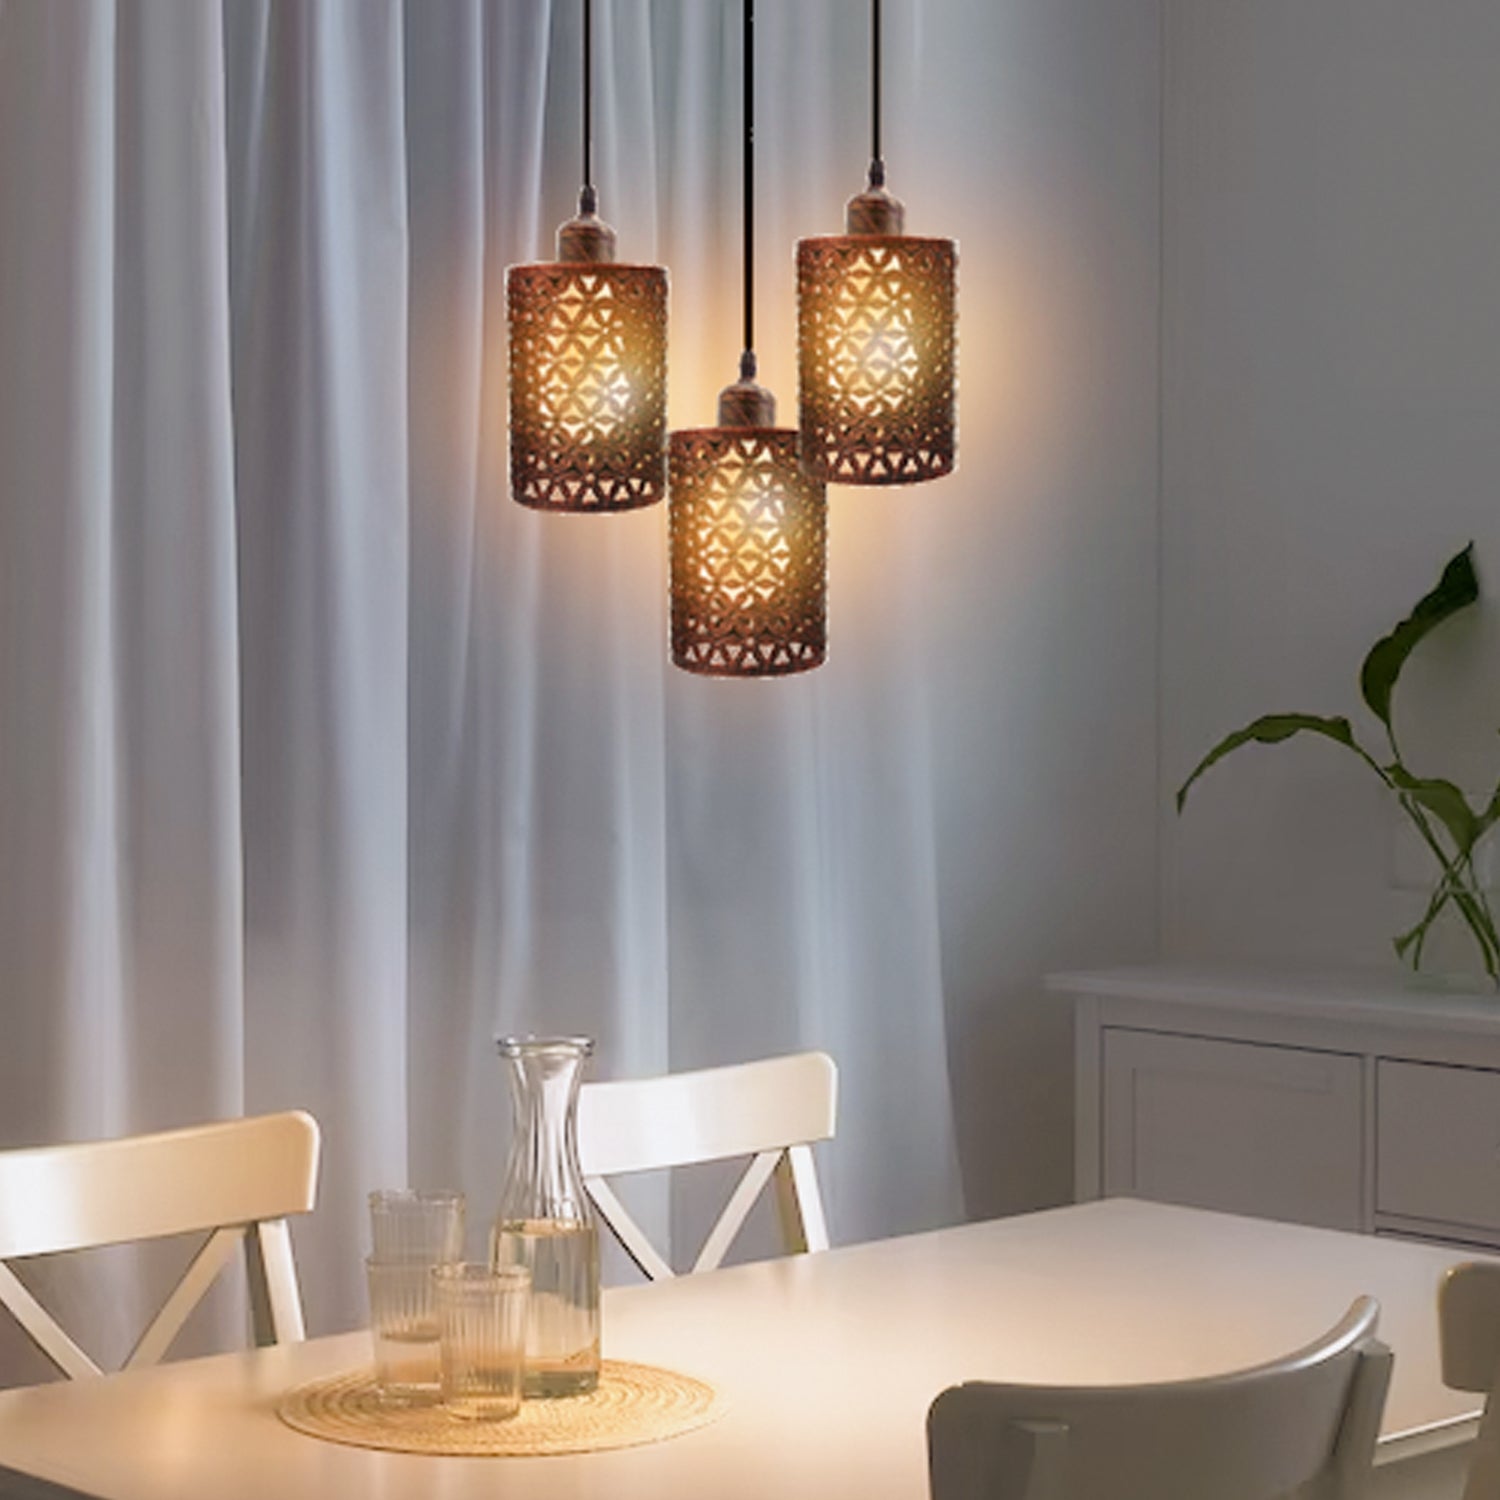 3 light hanging cluster pendant light over Dining table